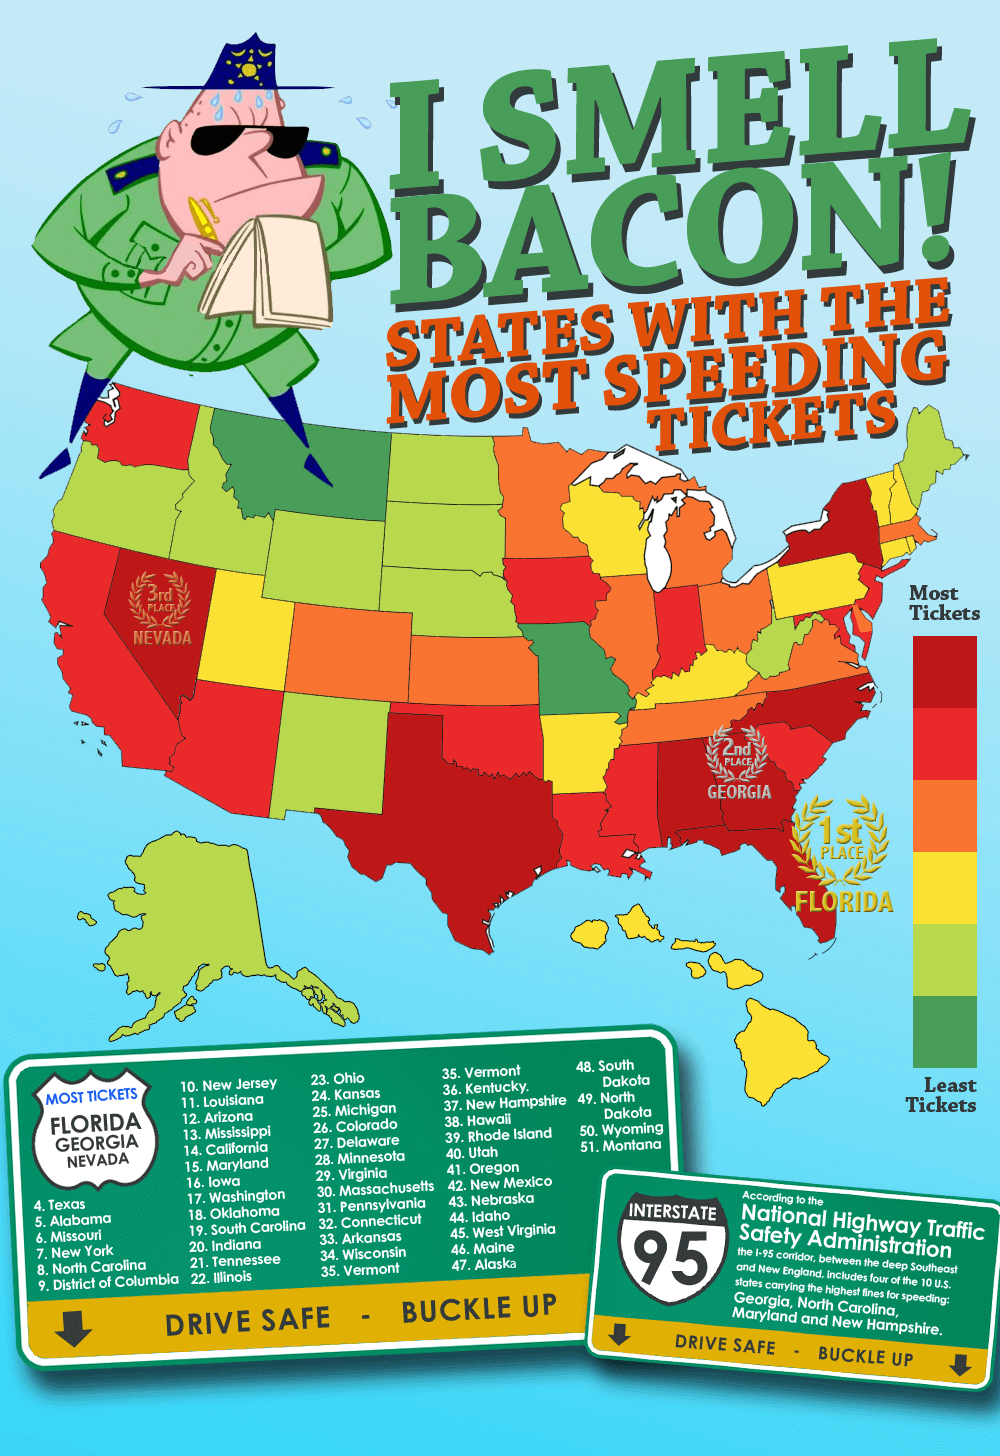 States With the Largest Number of Speeding Tickets